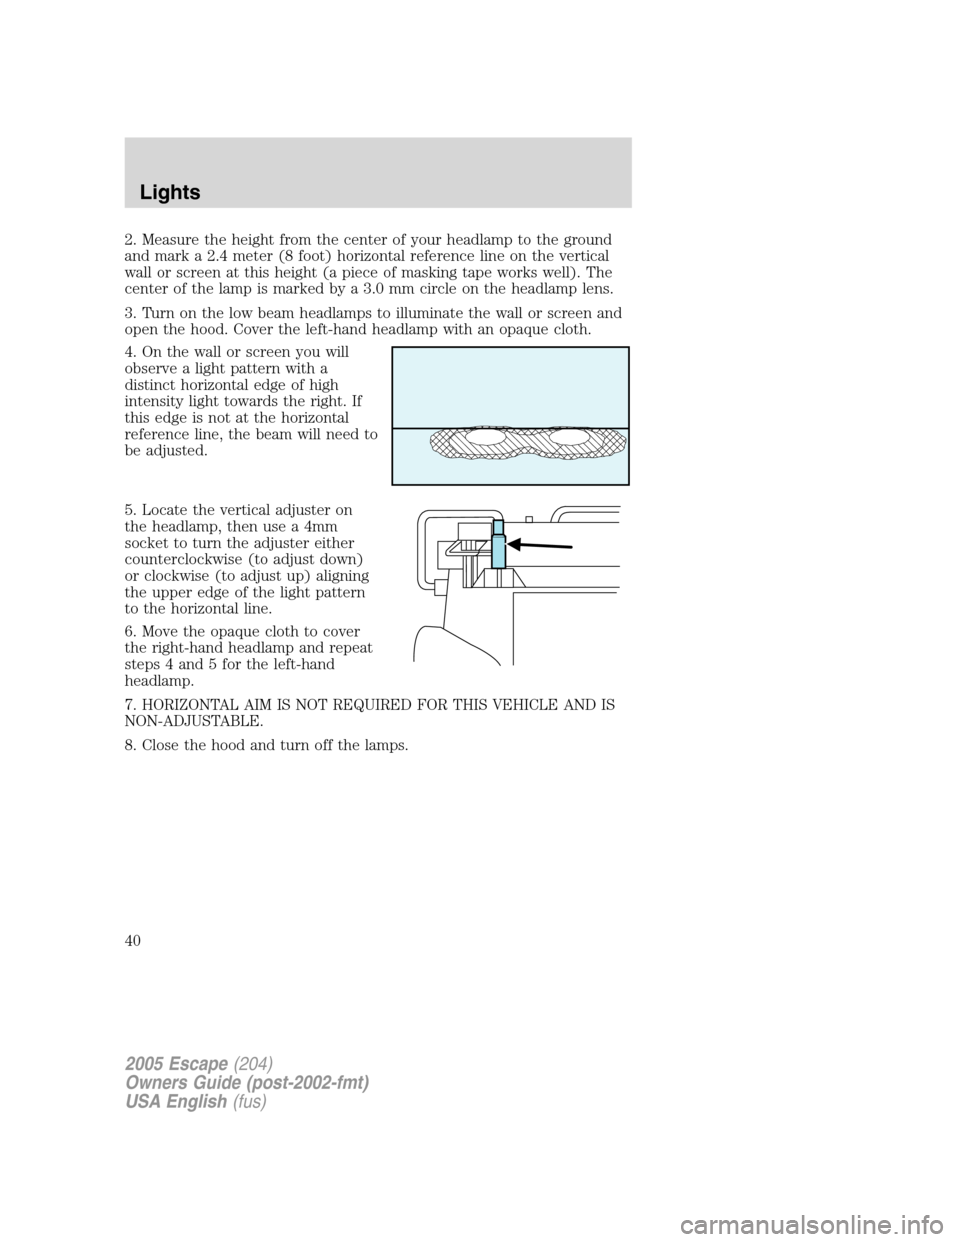 FORD ESCAPE 2005 1.G Owners Guide 2. Measure the height from the center of your headlamp to the ground
and mark a 2.4 meter (8 foot) horizontal reference line on the vertical
wall or screen at this height (a piece of masking tape work